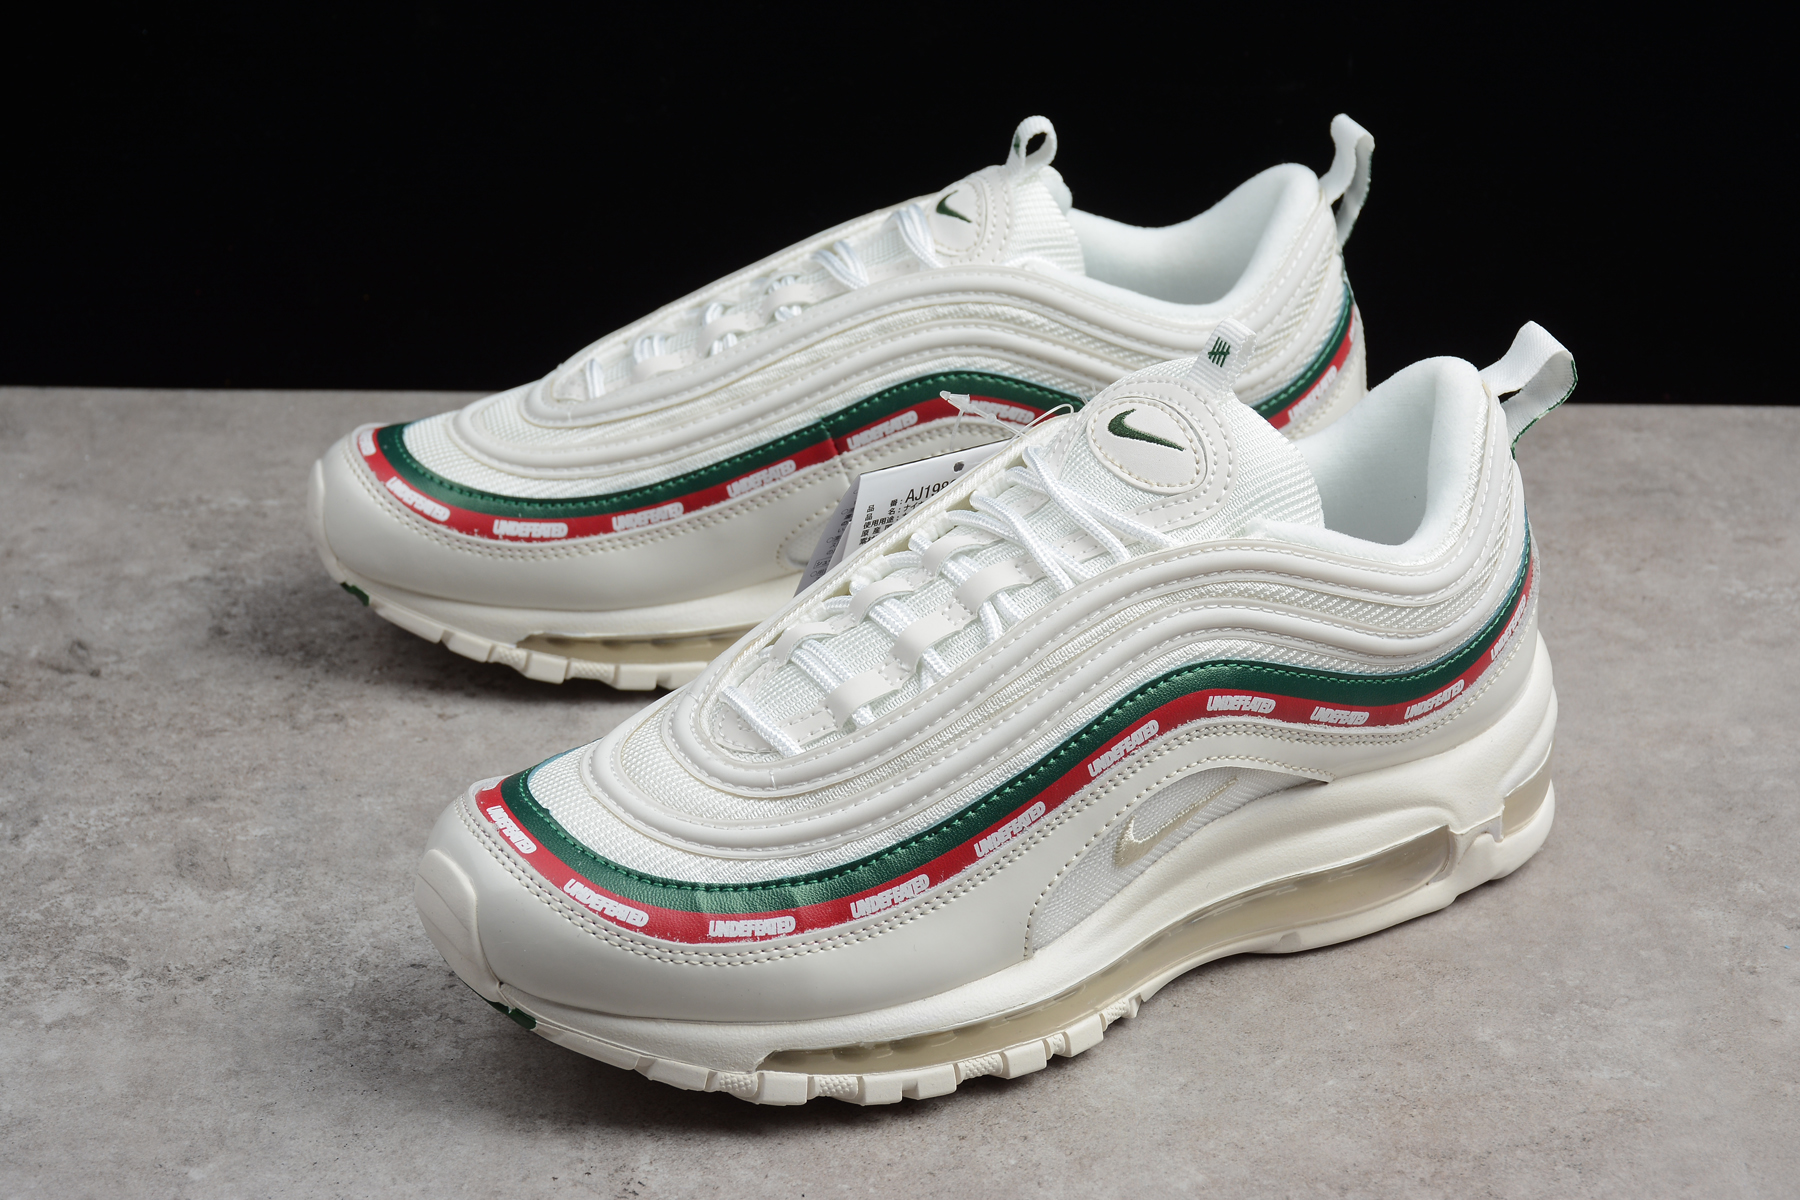 Mens and WMNS Undefeated x Nike Air Max 97 OG in White AJ1986-100 For Sale